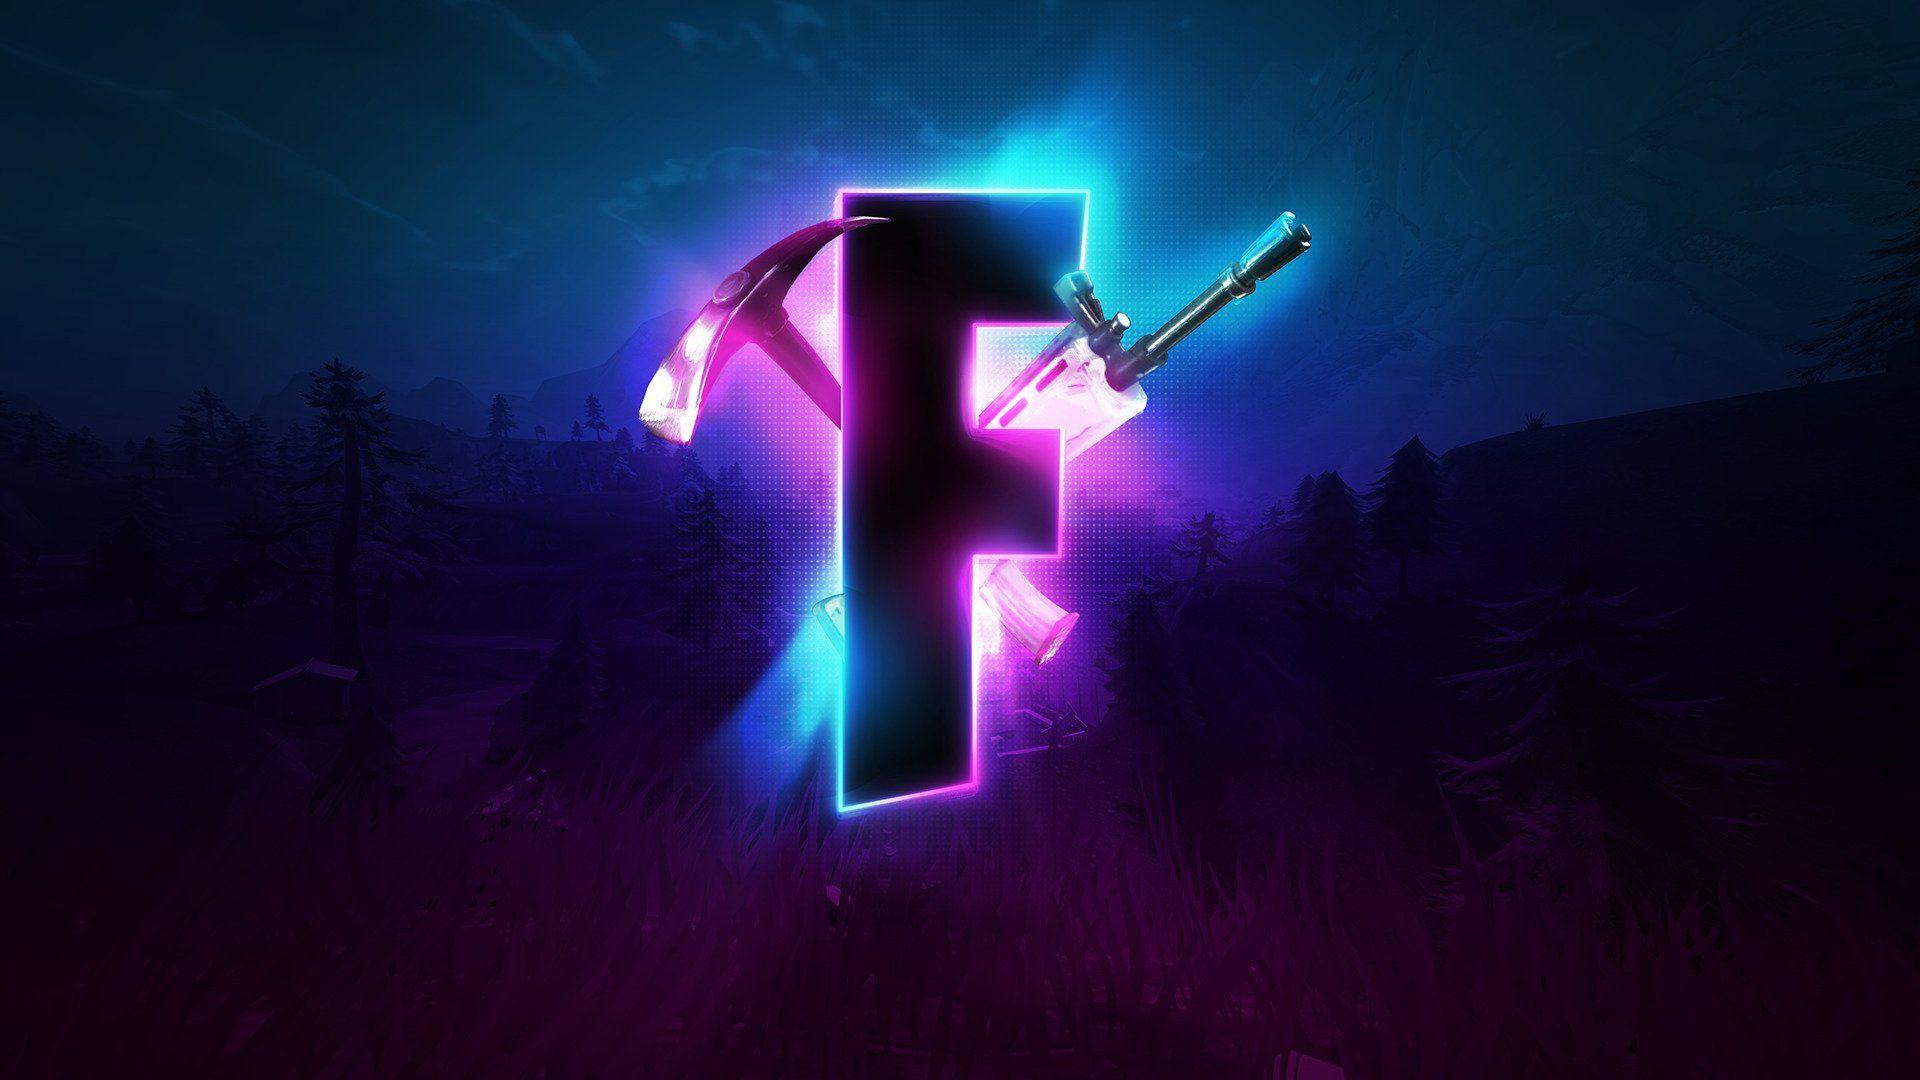 Fortnite F Logo - F stands for Fortnite by Noah Stephenson #4295 Wallpapers and Free ...